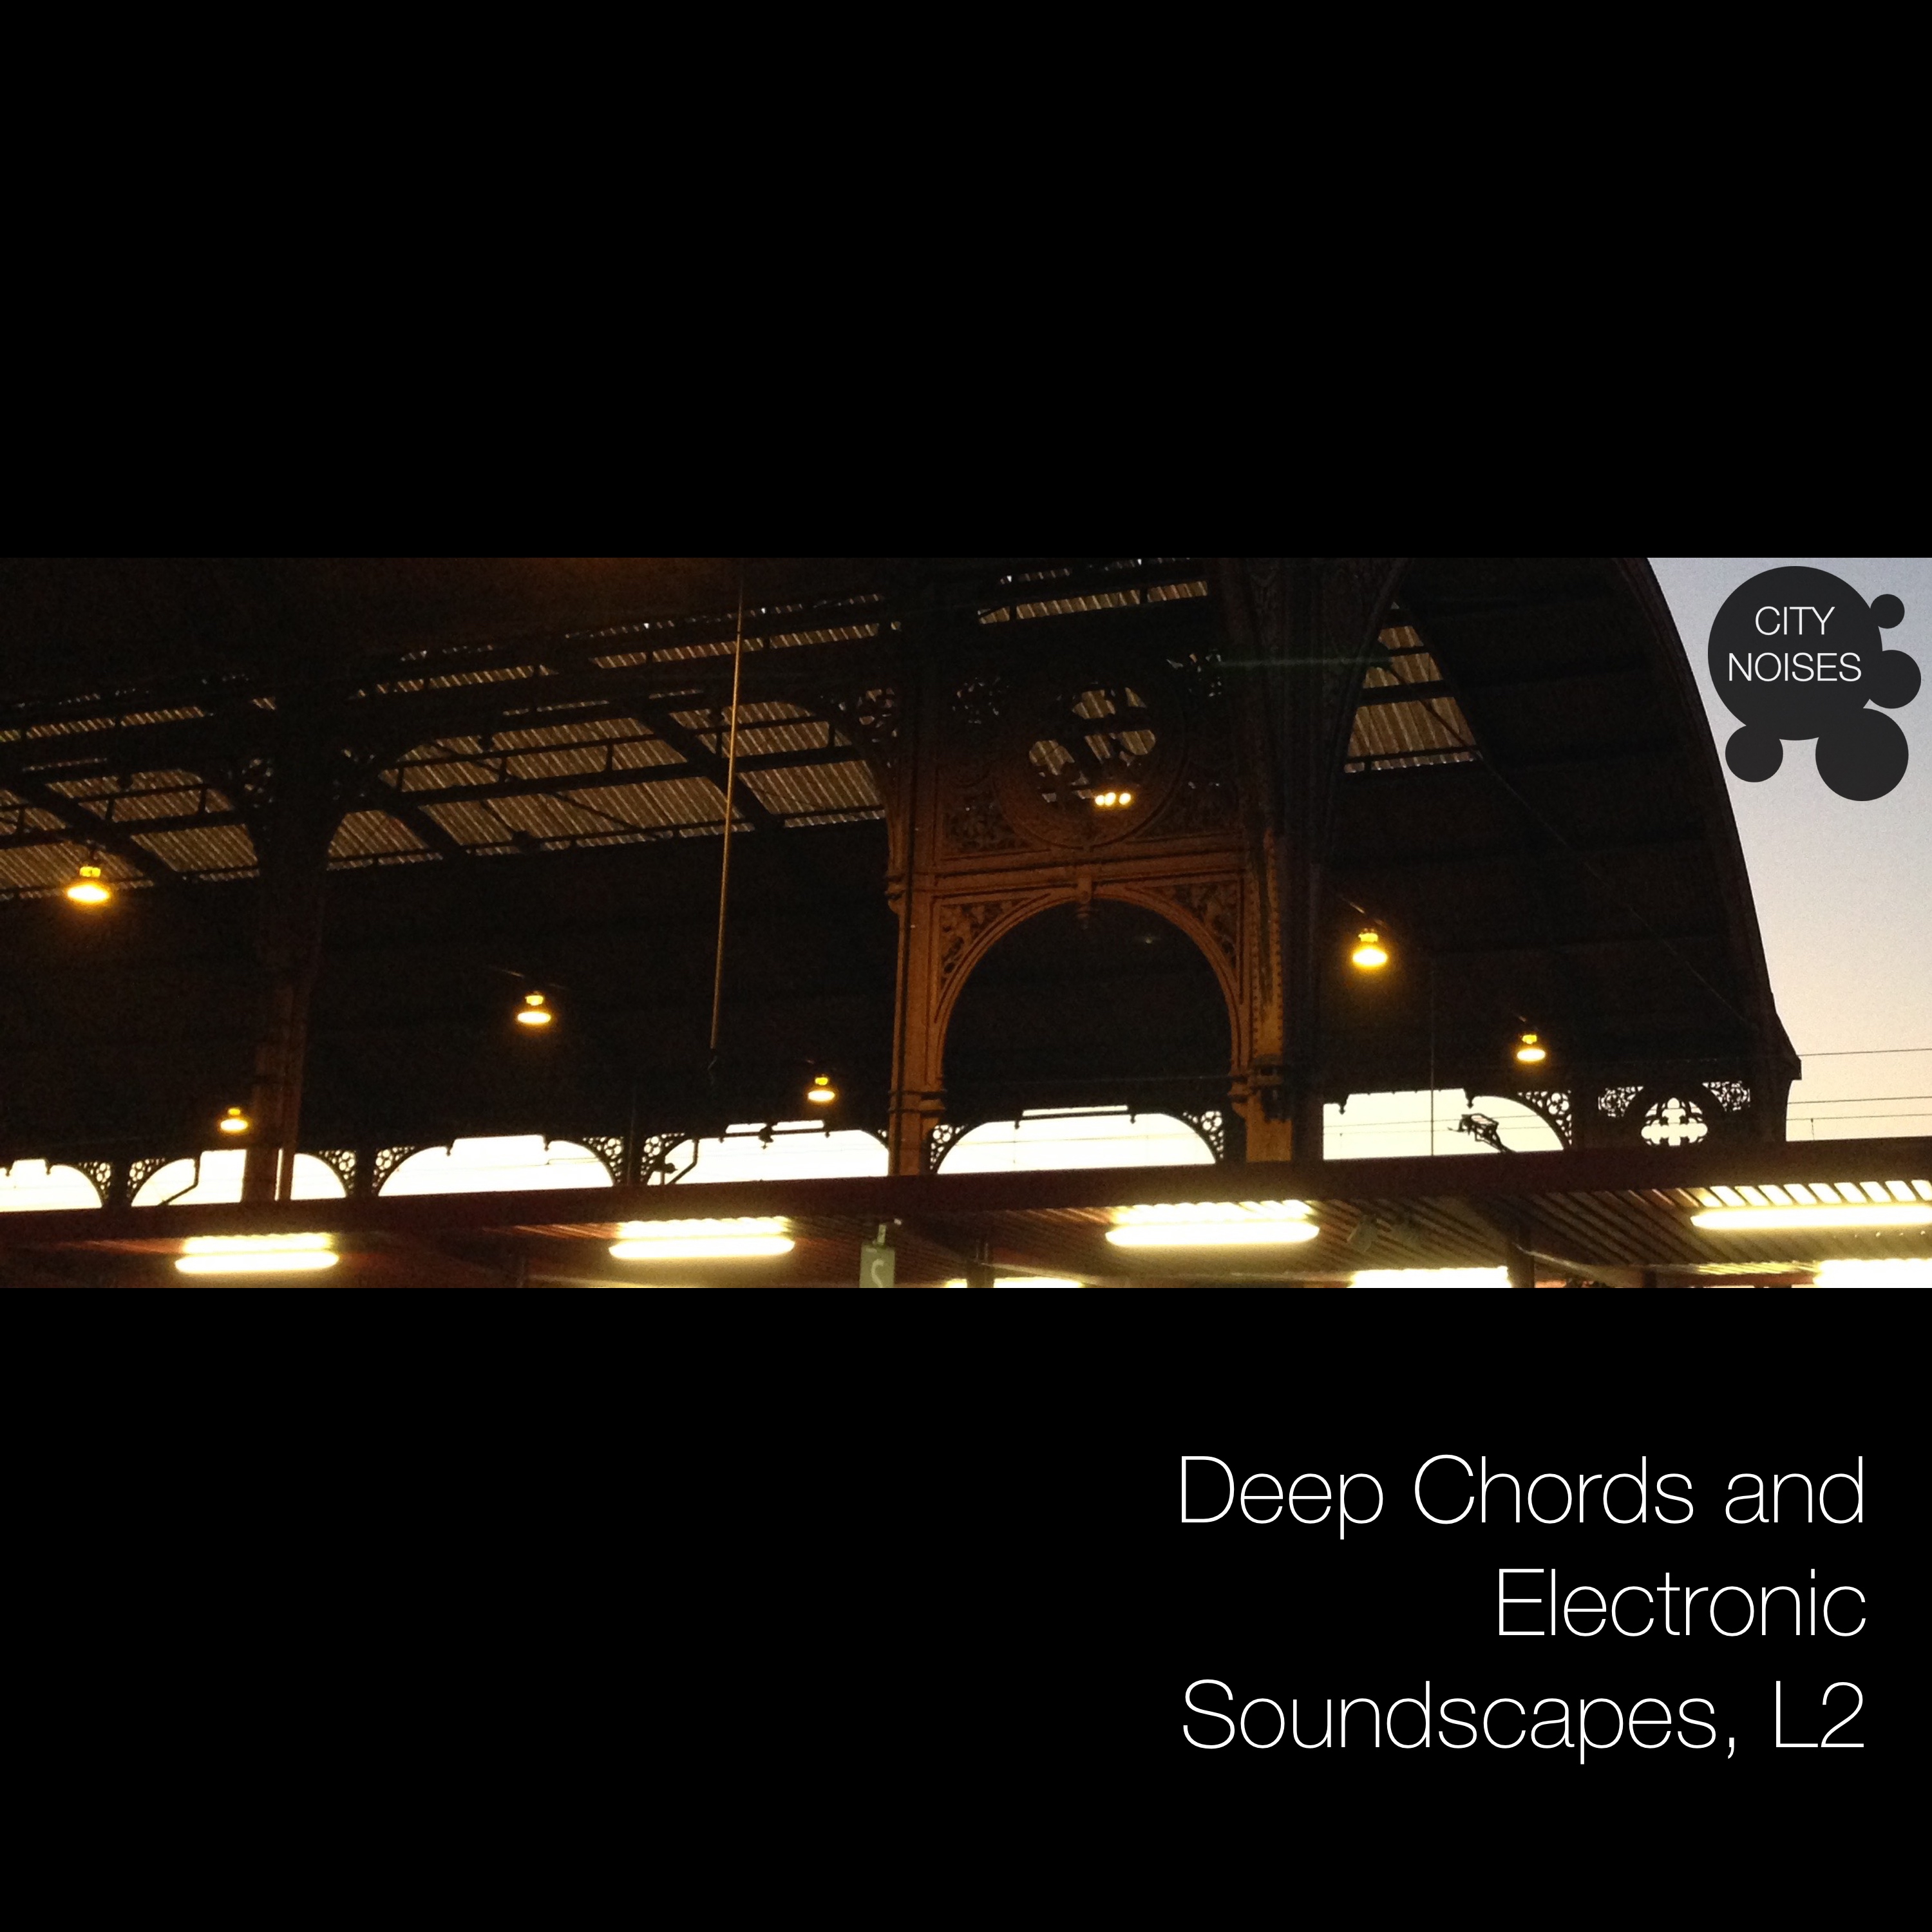 Deep Chords and Electronic Soundscapes, L2